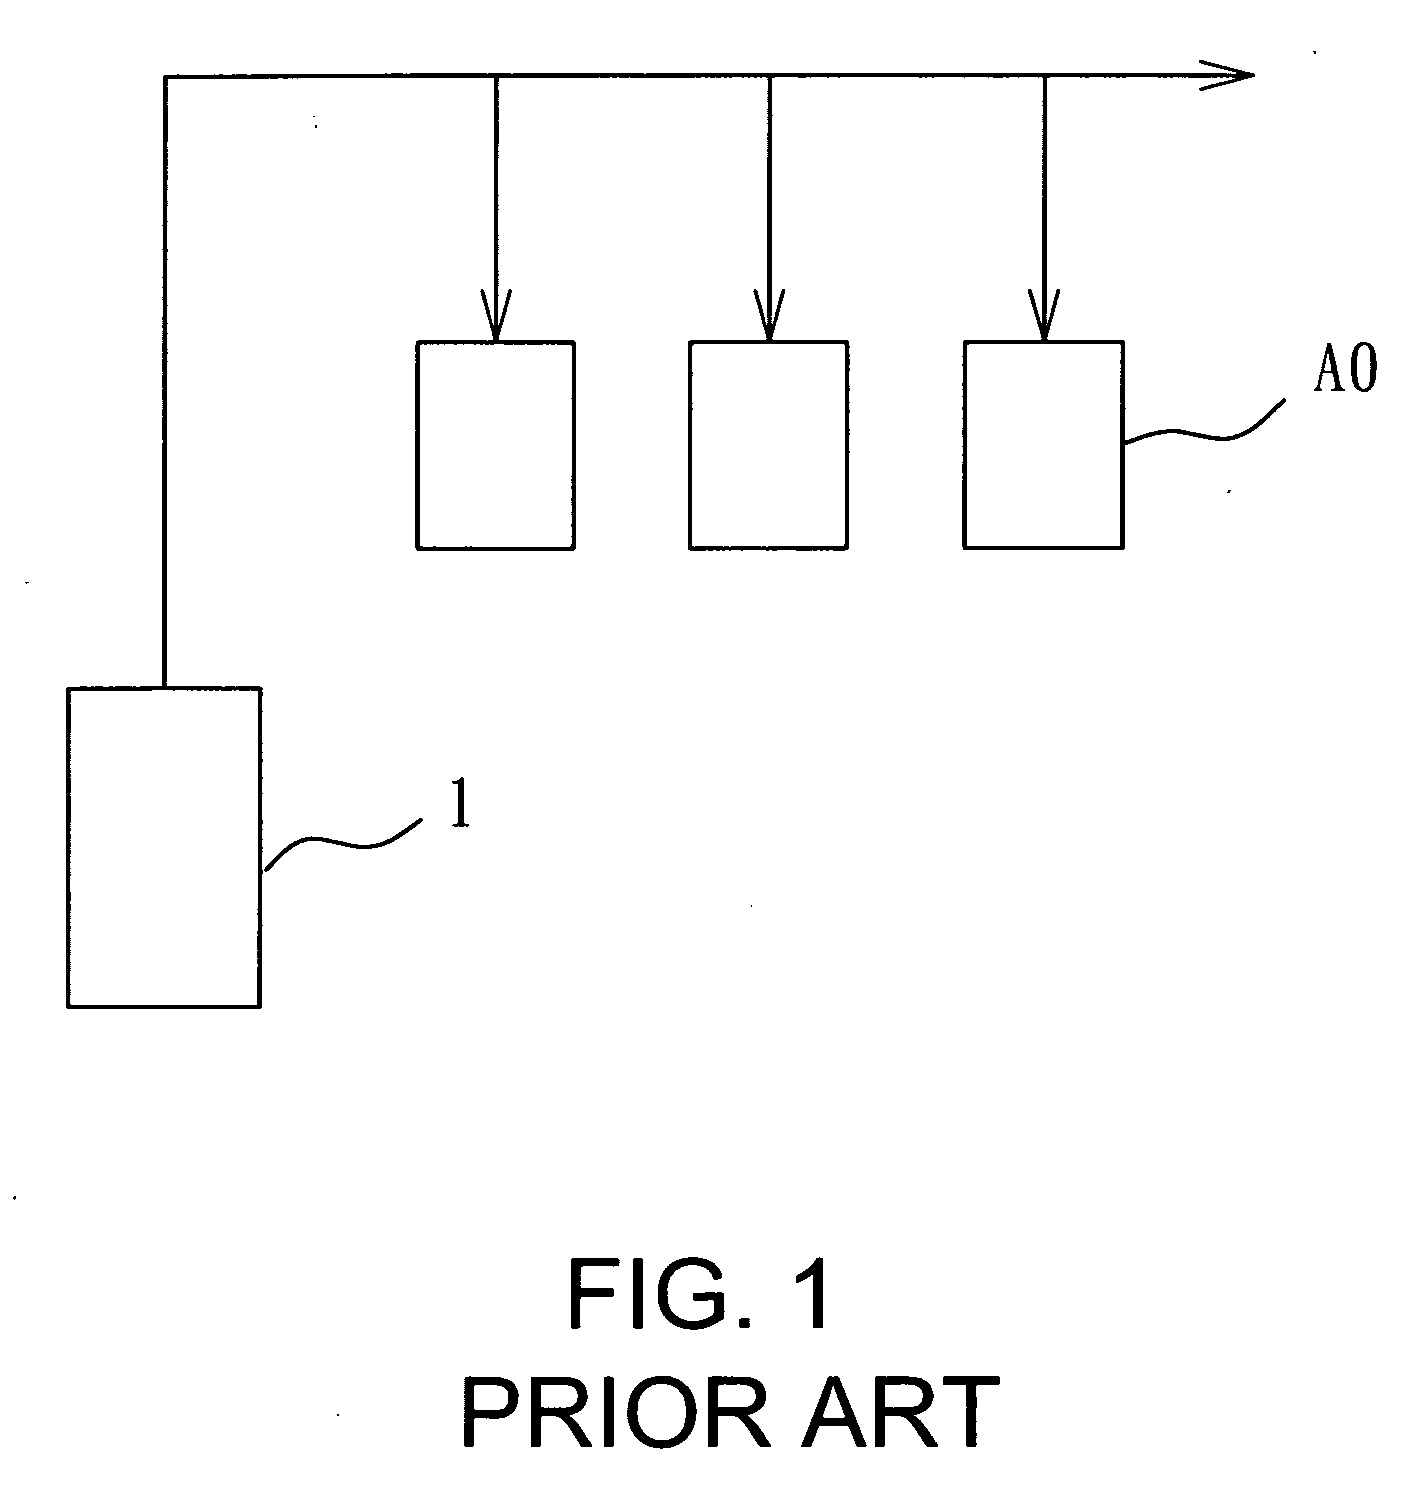 Air conditioning system having a terminal chest to provide optimal airflow